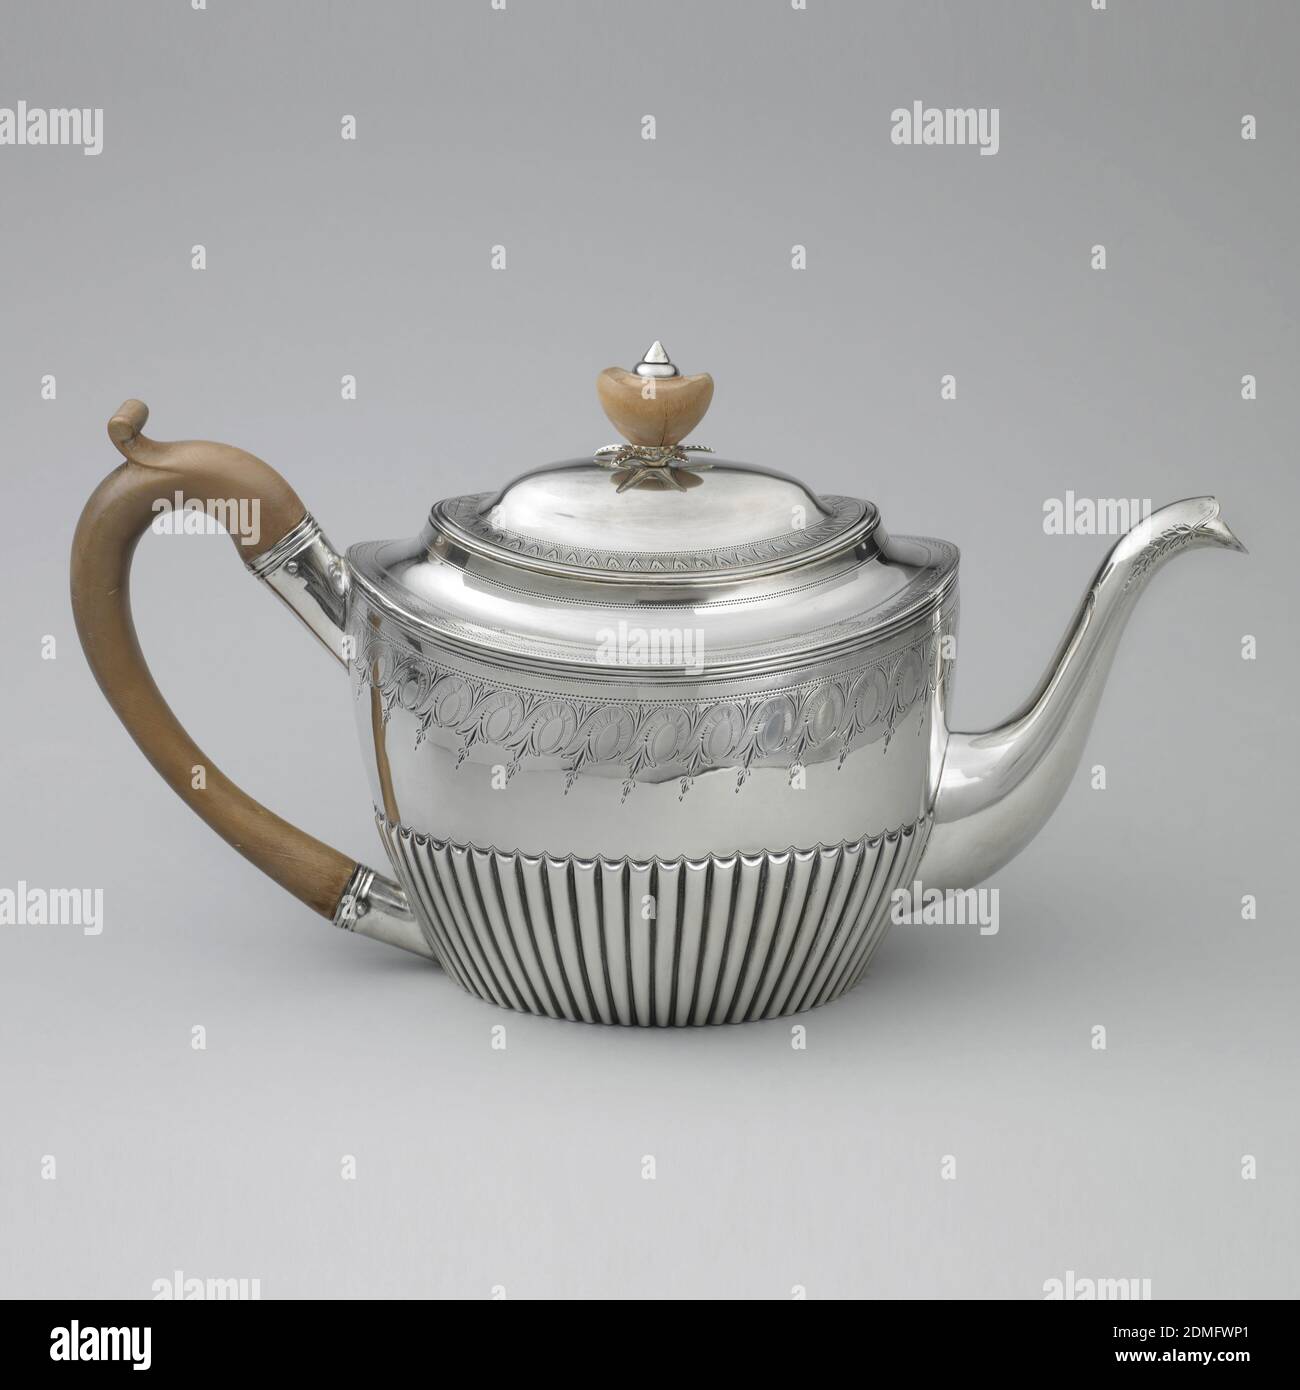 https://c8.alamy.com/comp/2DMFWP1/teapot-silver-wood-silver-teapot-engraved-with-a-foliate-and-spiral-patterned-band-at-the-shoulder-above-a-tapering-reeded-base-curved-spout-curved-wooden-handle-slightly-domed-lid-with-wooden-finial-of-smooth-acorn-shape-topped-with-silver-terminus-its-base-with-silver-leaf-form-surround-london-england-179899-metalwork-decorative-arts-teapot-teapot-2DMFWP1.jpg